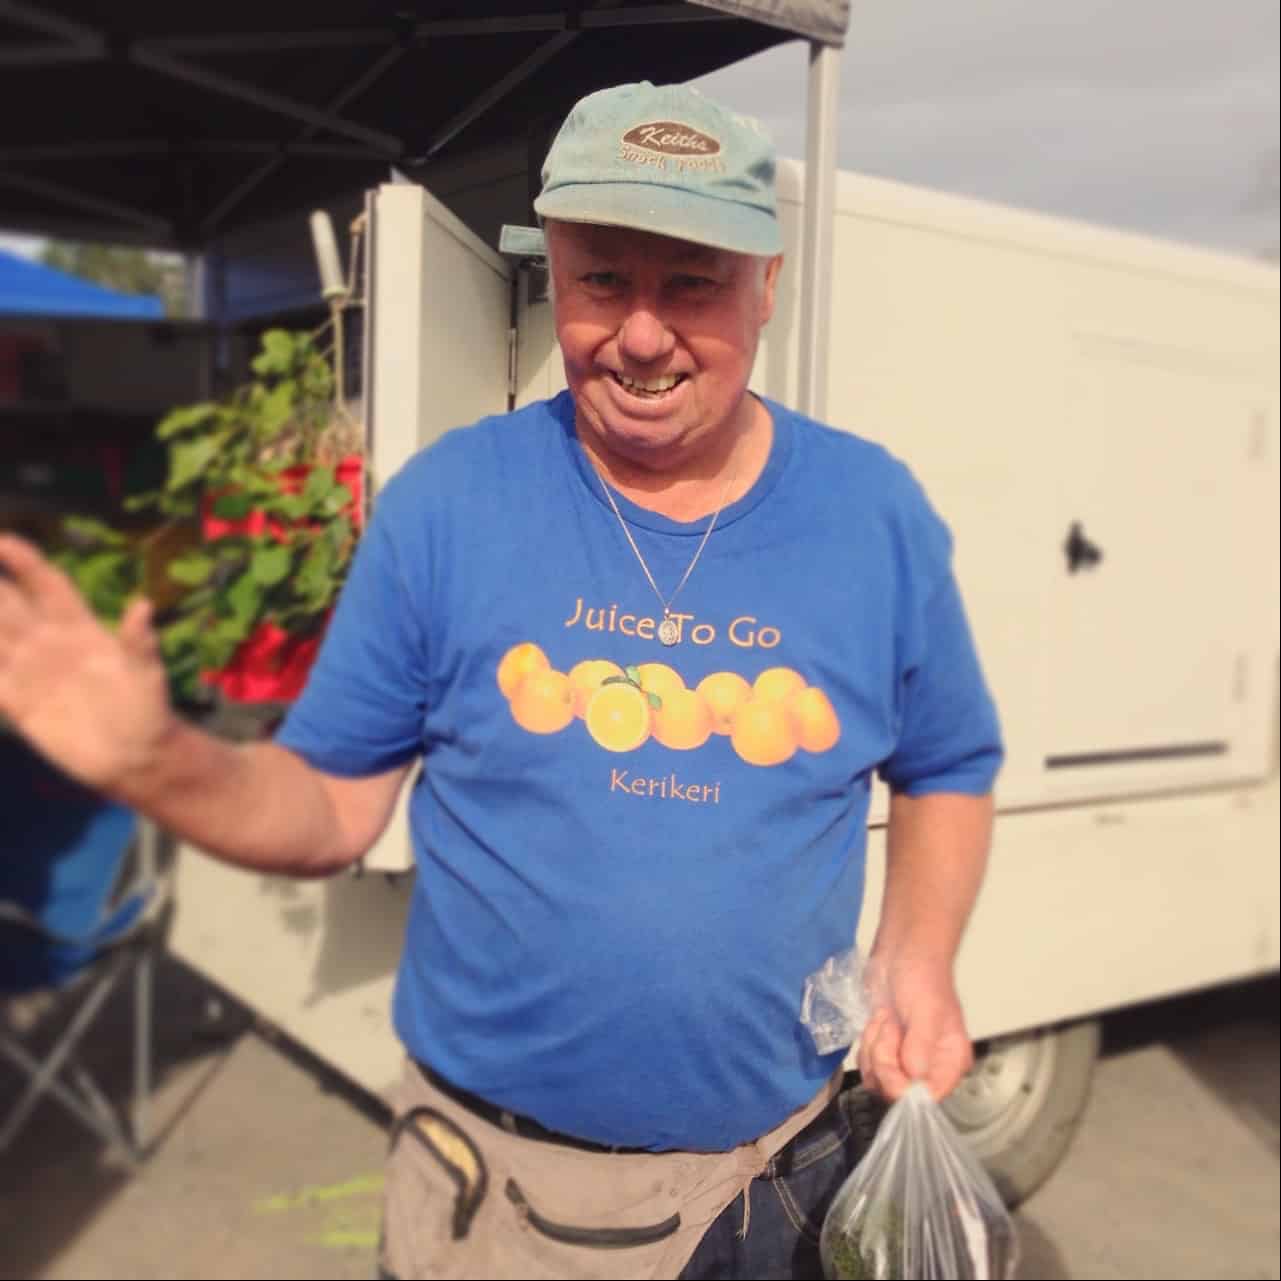 As well as selling his fruit at the local market, Keith also owns The Farm Store on Kerikeri Road, where you can buy in-season fruit. It's run with an honesty box system, but there's a bell you can ring if you need change.